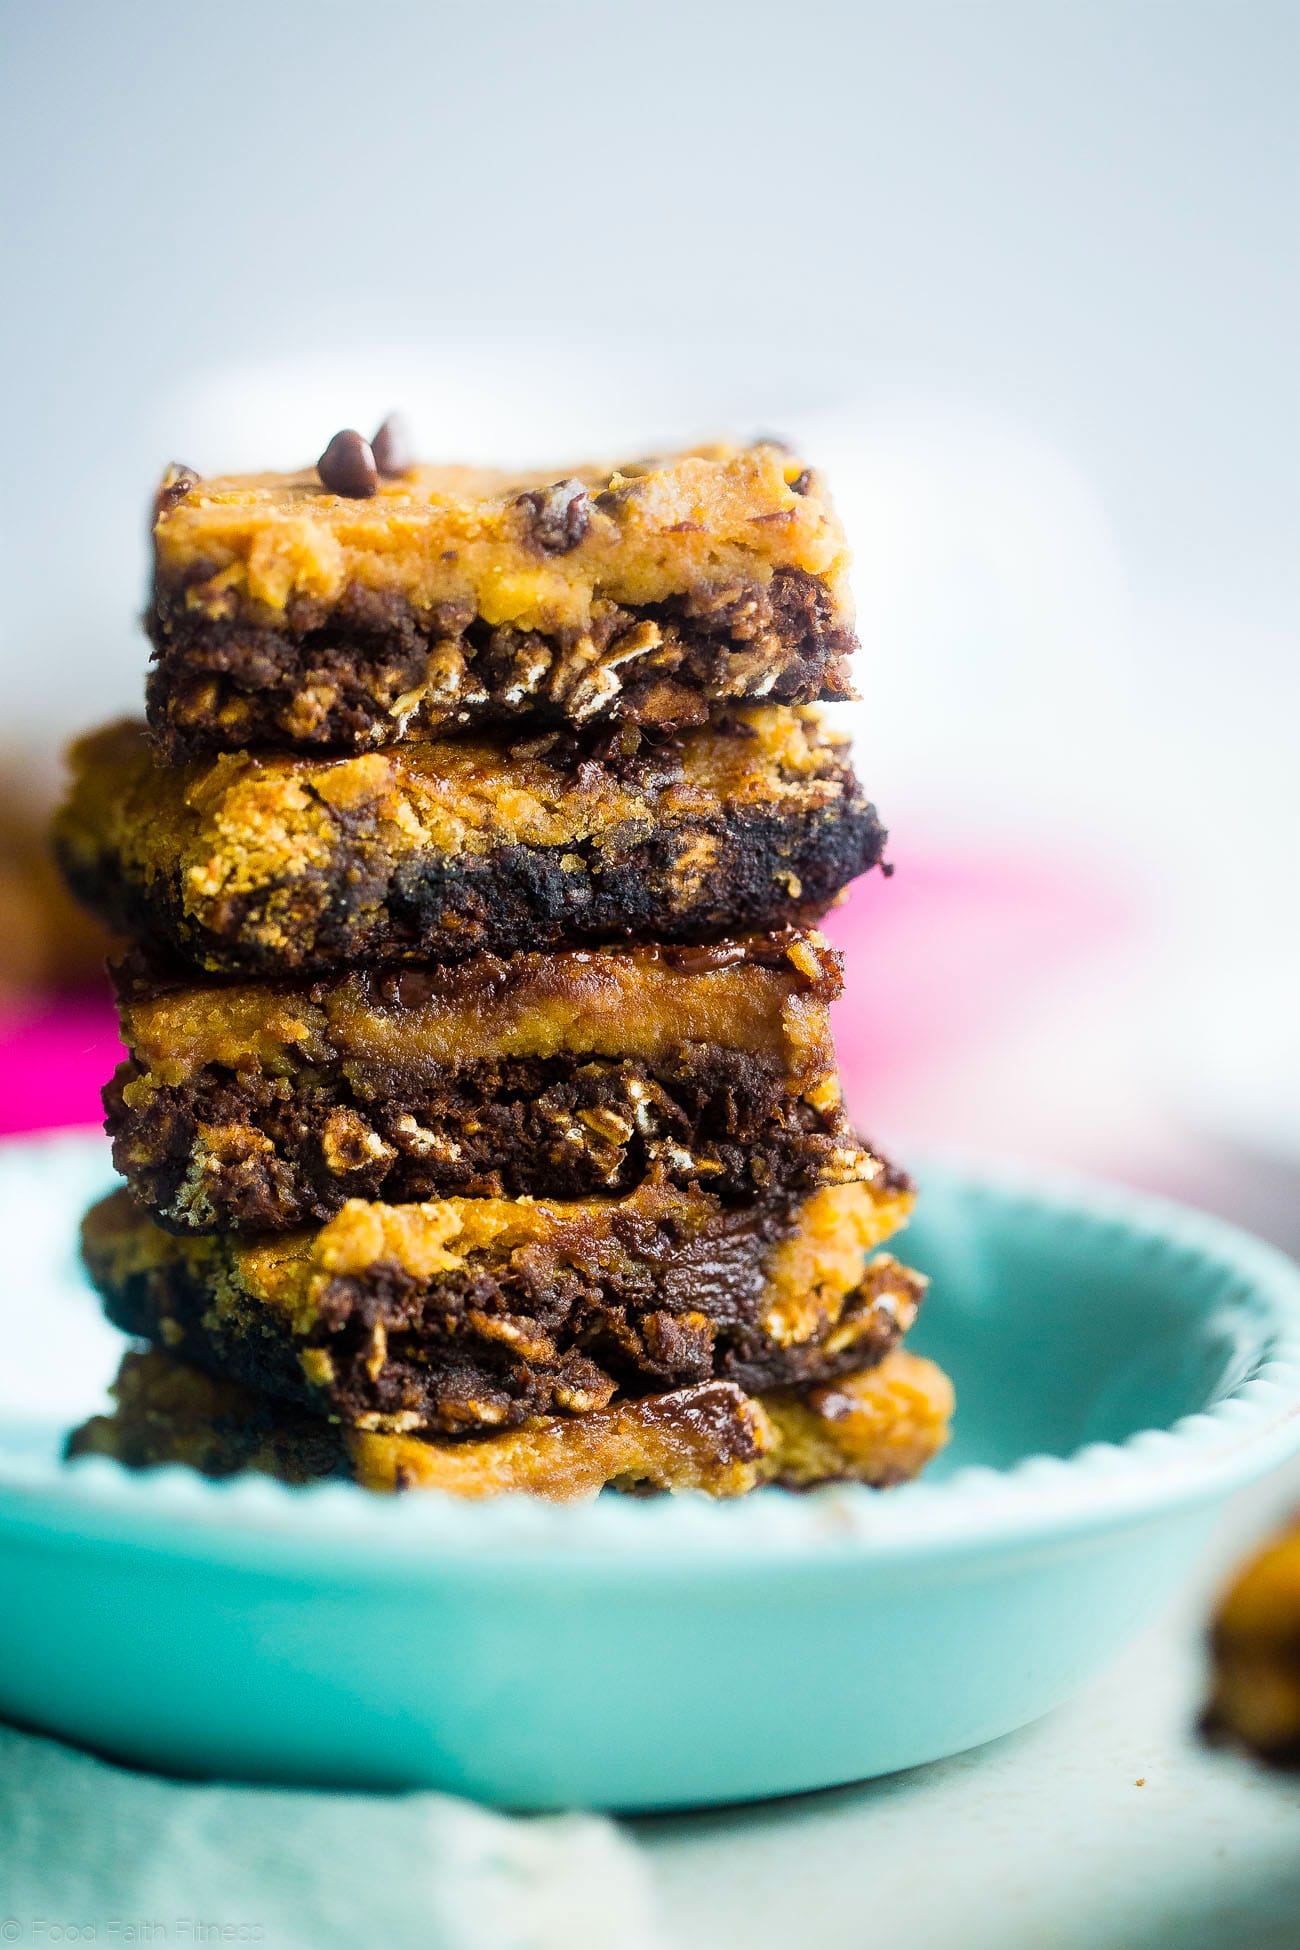 These Vegan Cookie Dough Oatmeal Breakfast Bars are perfect for an healthy grab and go breakfast. Plus they taste like cookie dough! Packed with real food plant based protein, chocolate chips, and gluten free oats. A healthy wholesome bar for breakfast. www.cottercrunch.com